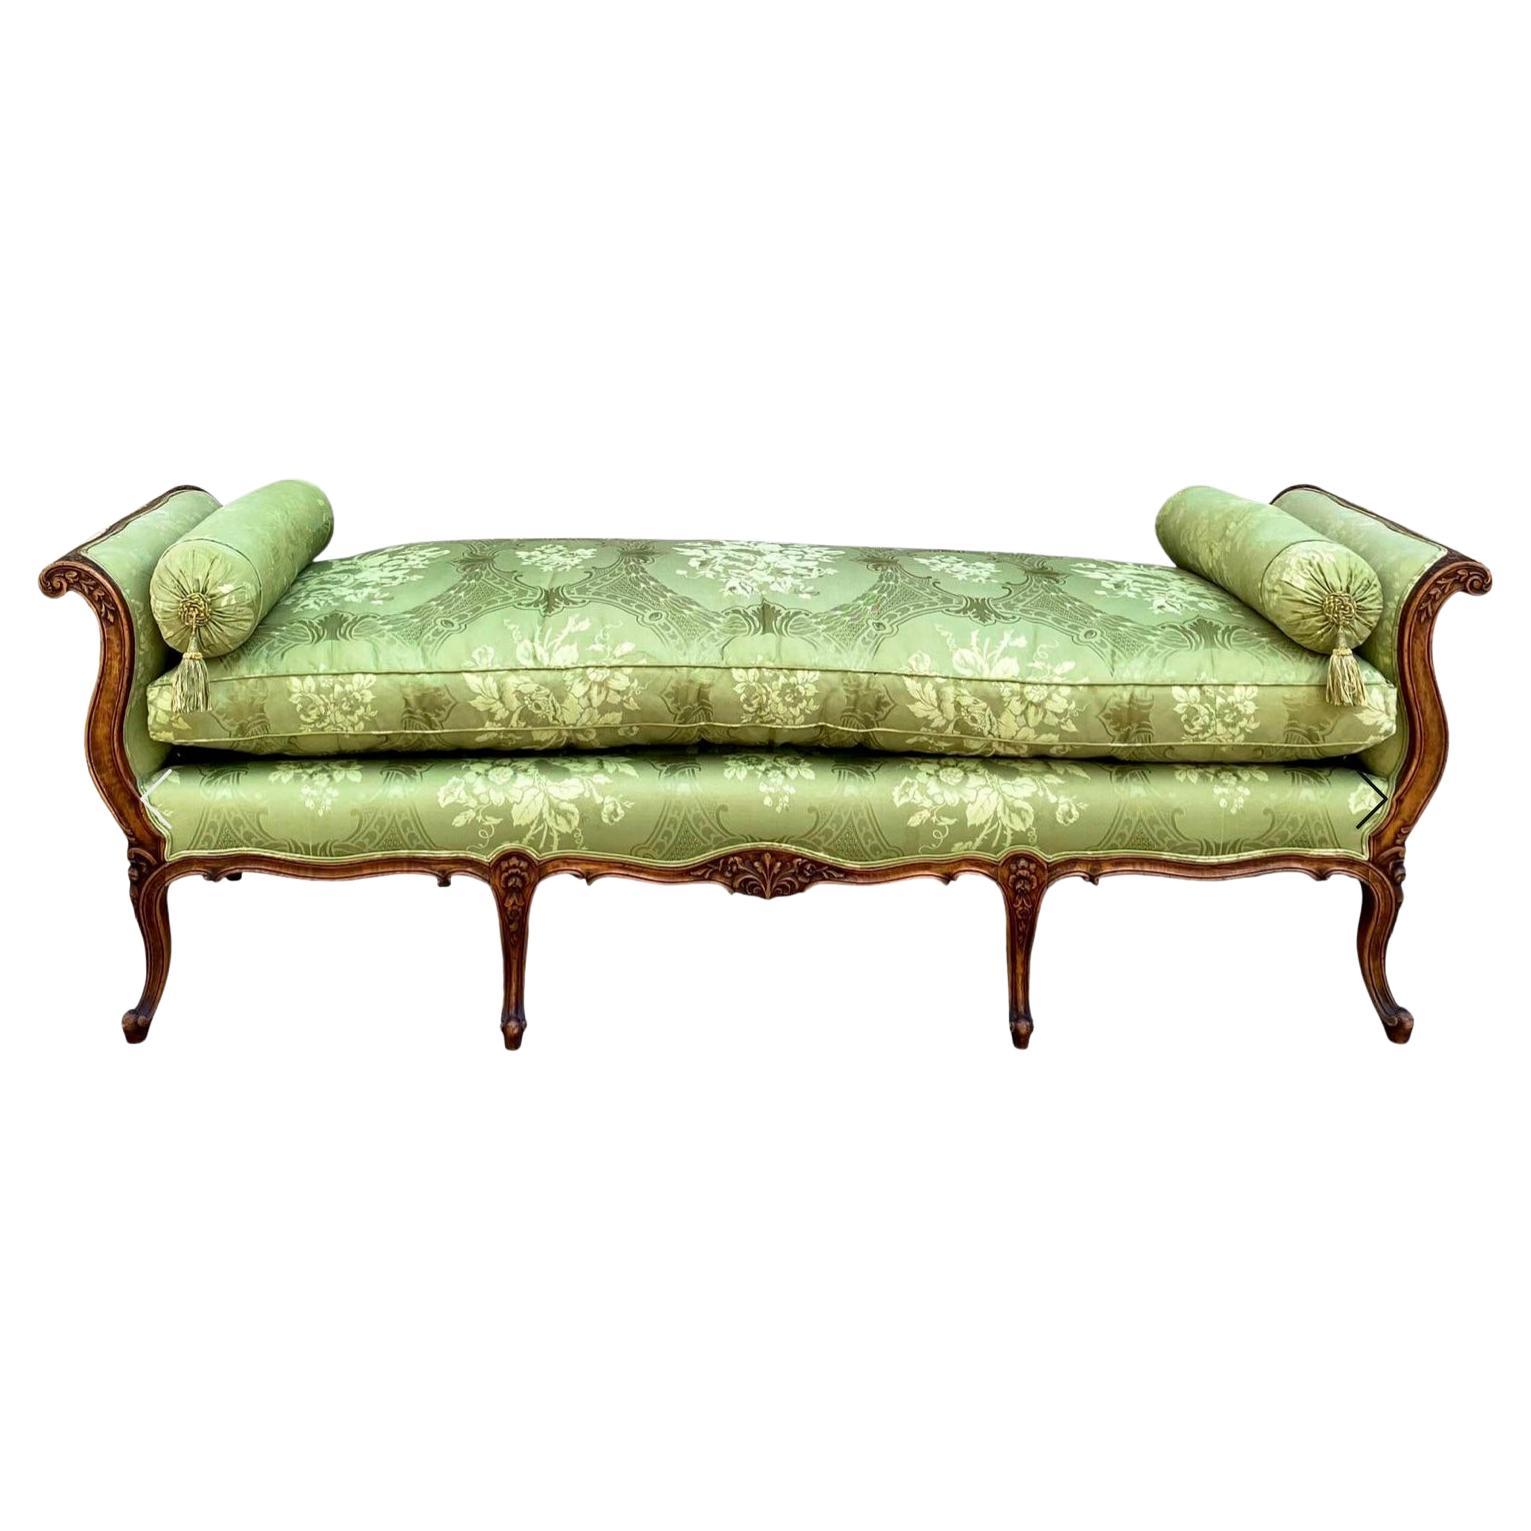 This is a lovely early 20th century French carved daybed in vintage embroidered green silk. The frame is in very good condition. It has a nice, thick down cushion. The upholstery on one side is faded, but the other has no issues.